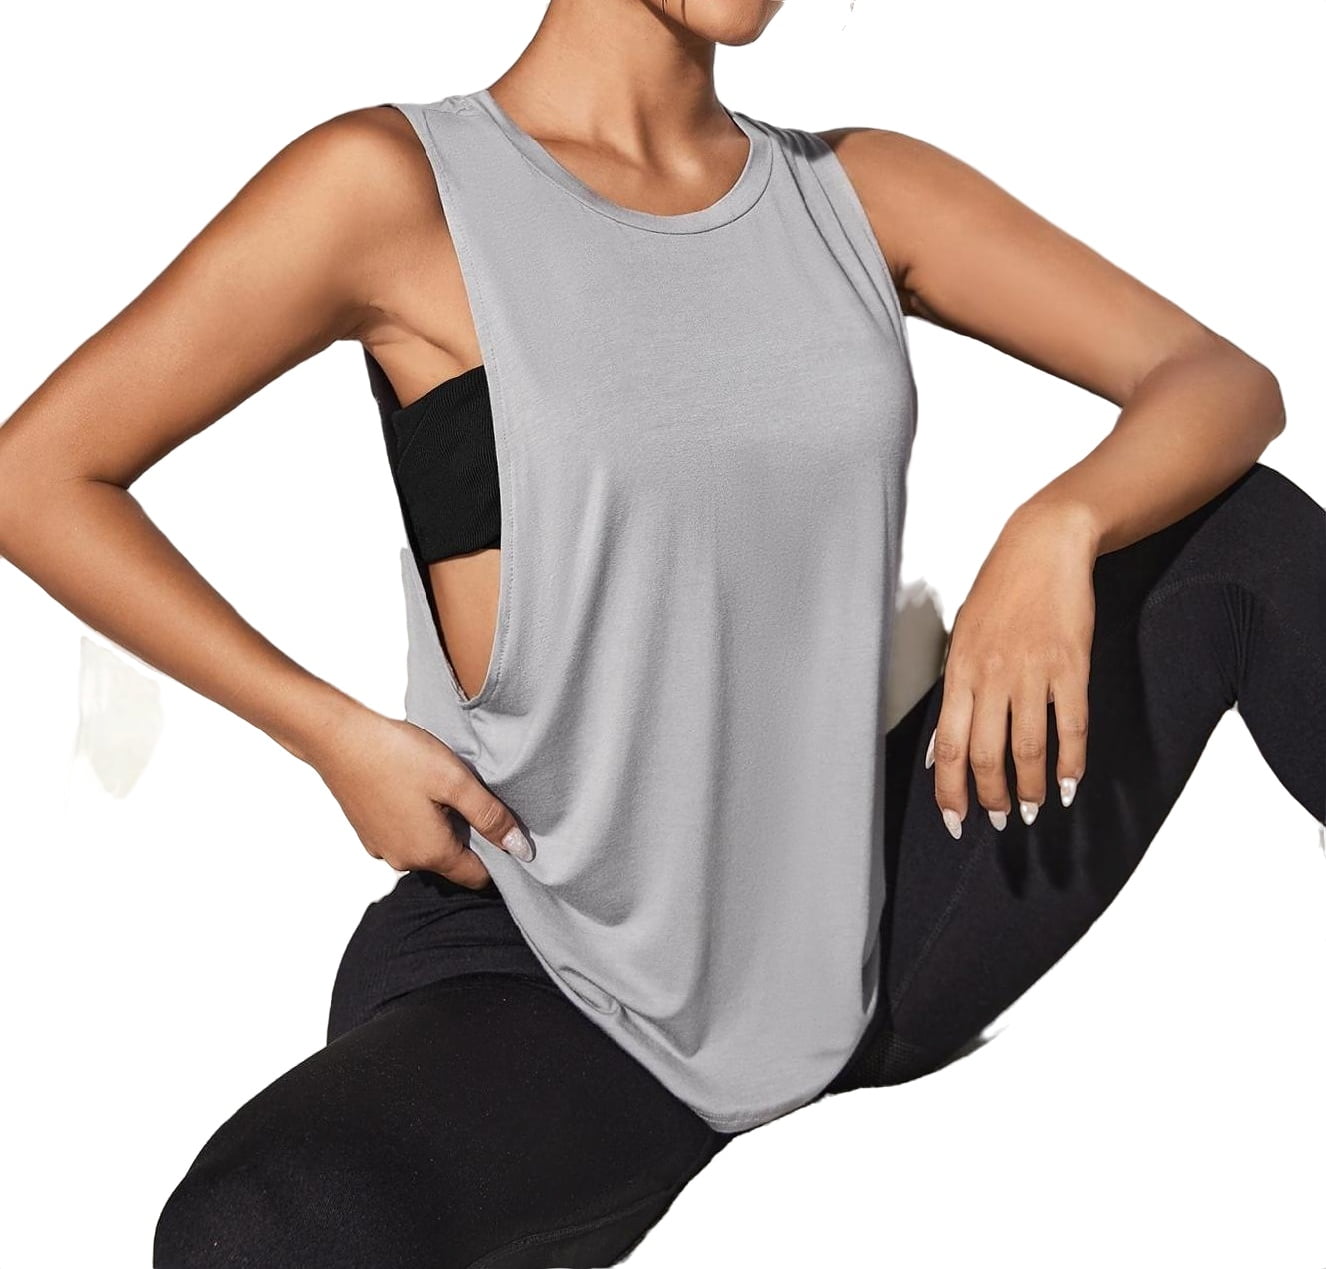 Women's Loose Fit Activewear Workout Gym Tank Tops Drop Armhole Athletic  Sports Running Yoga Tops Shirts M(6)